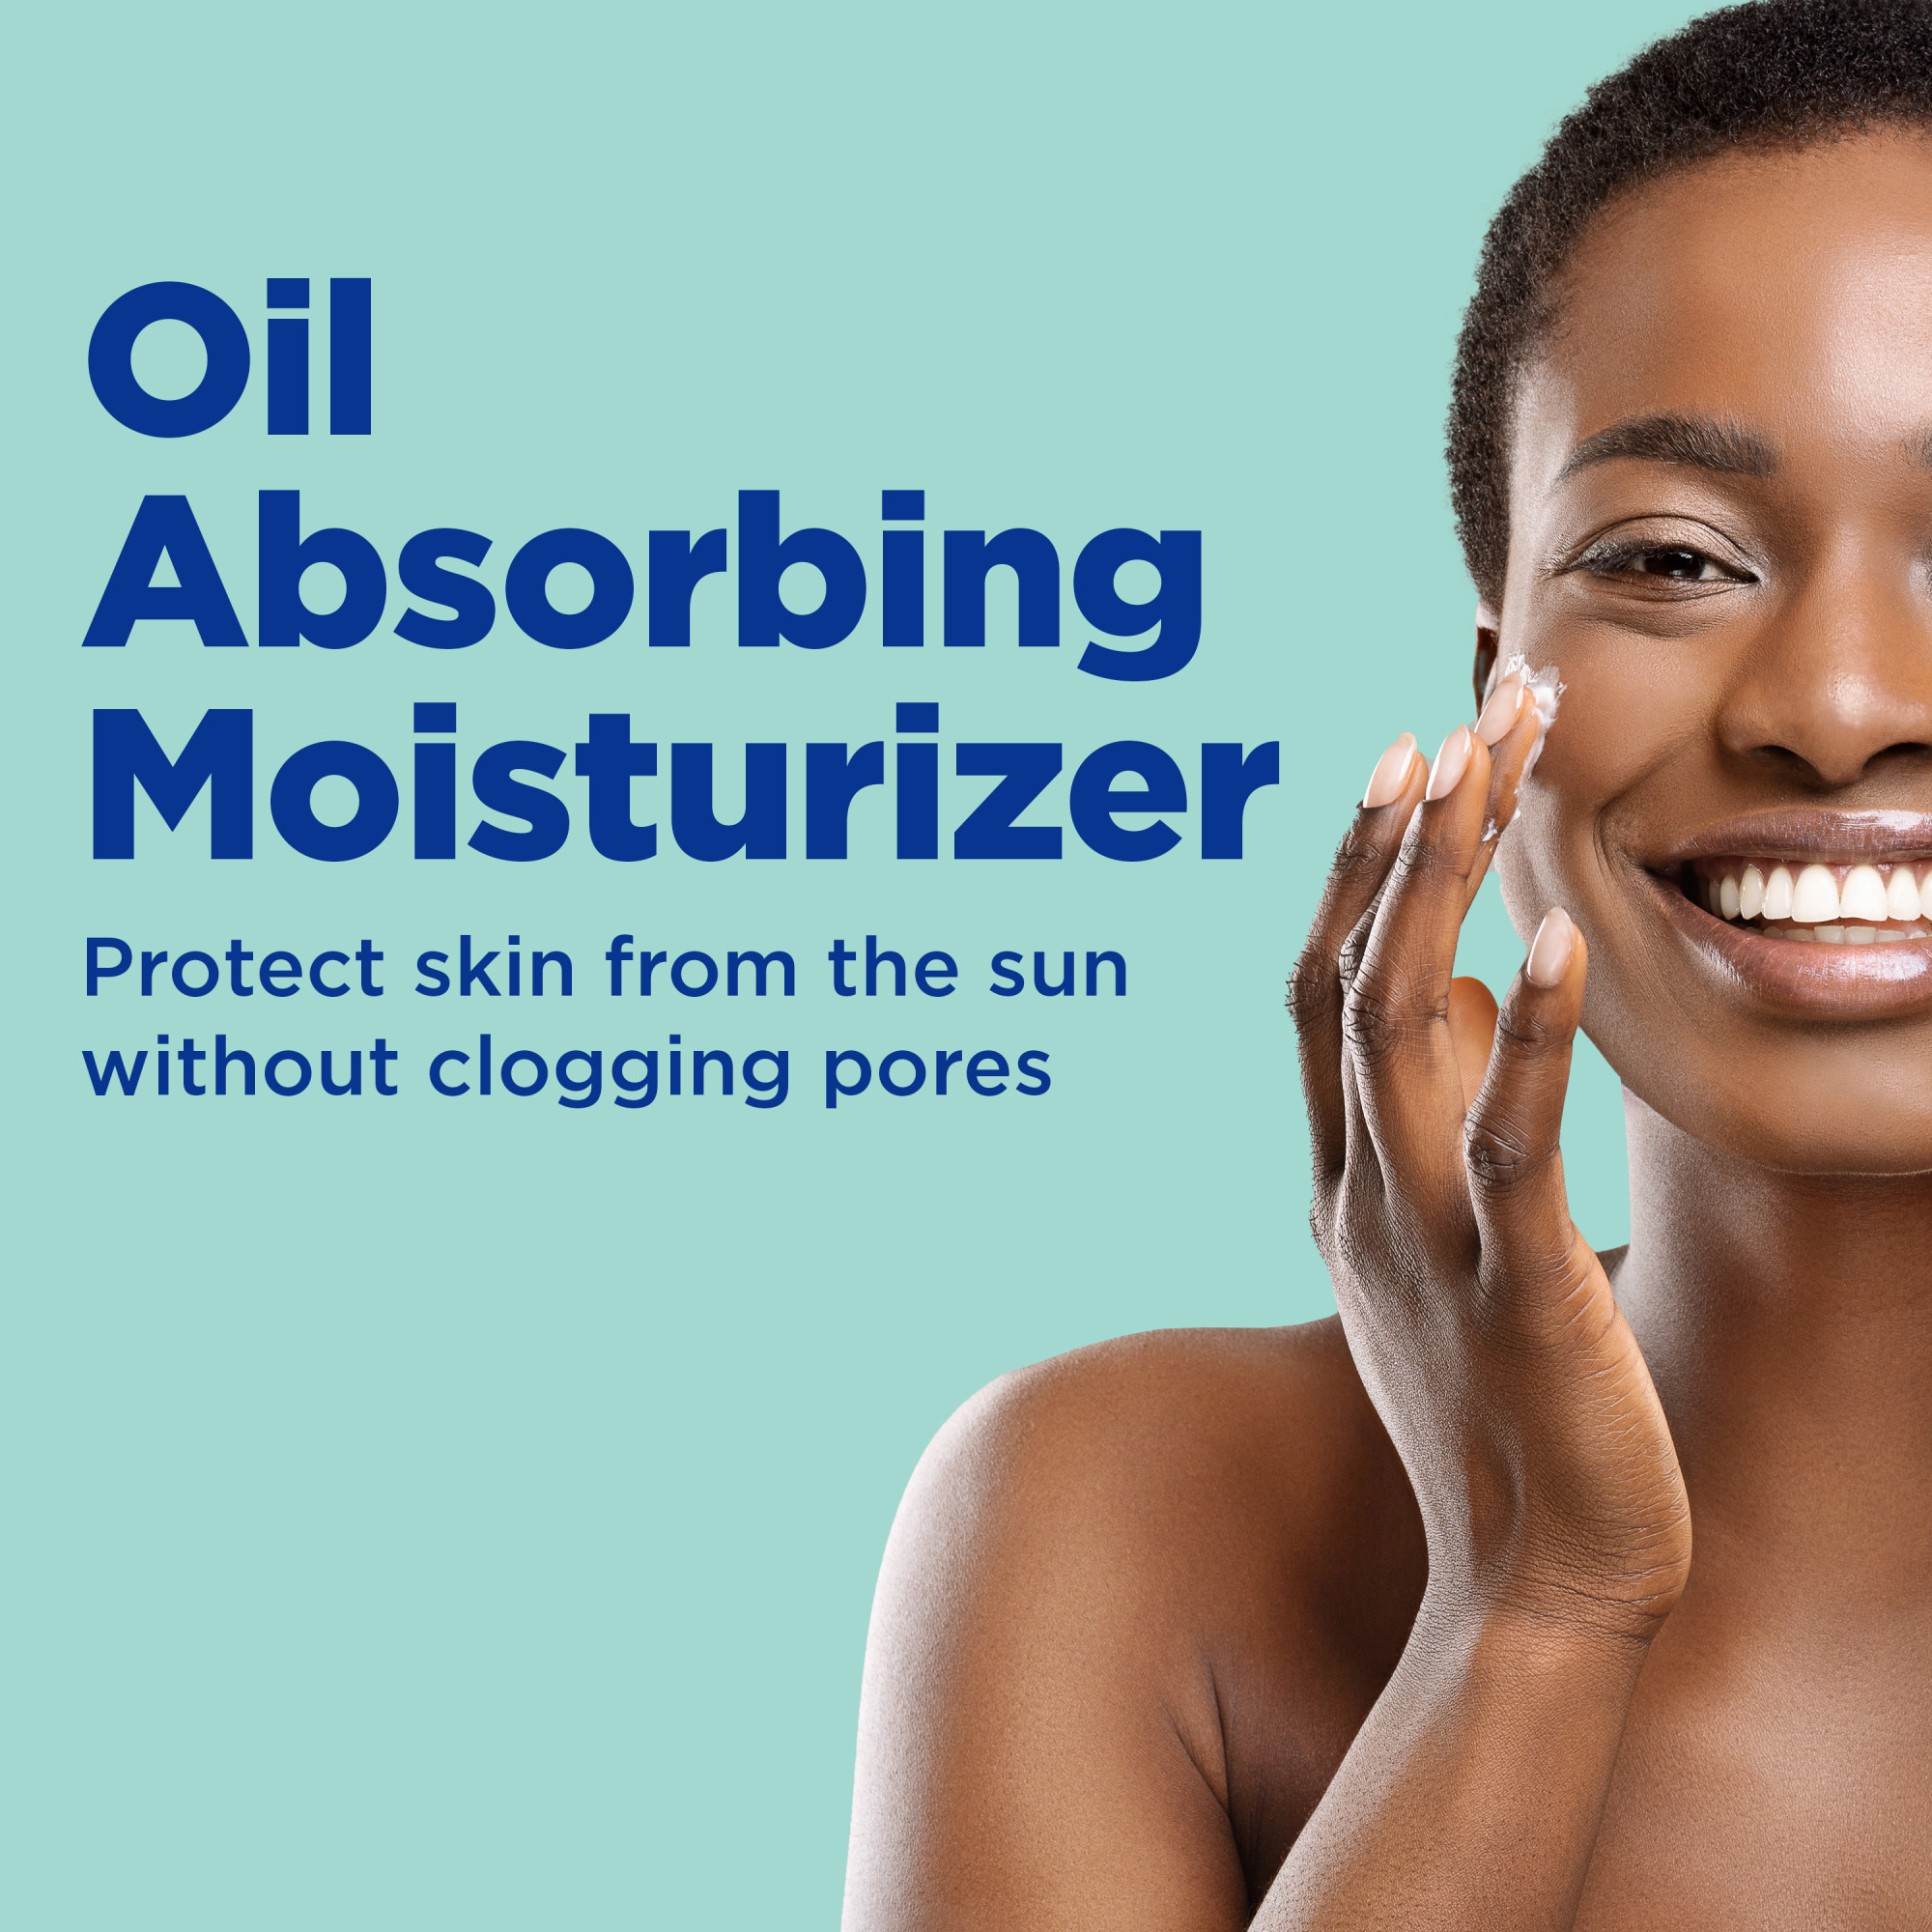 Differin Oil Absorbing Moisturizer with SPF30, Facial Moisturizer with Sun Protection, 4oz - image 3 of 7